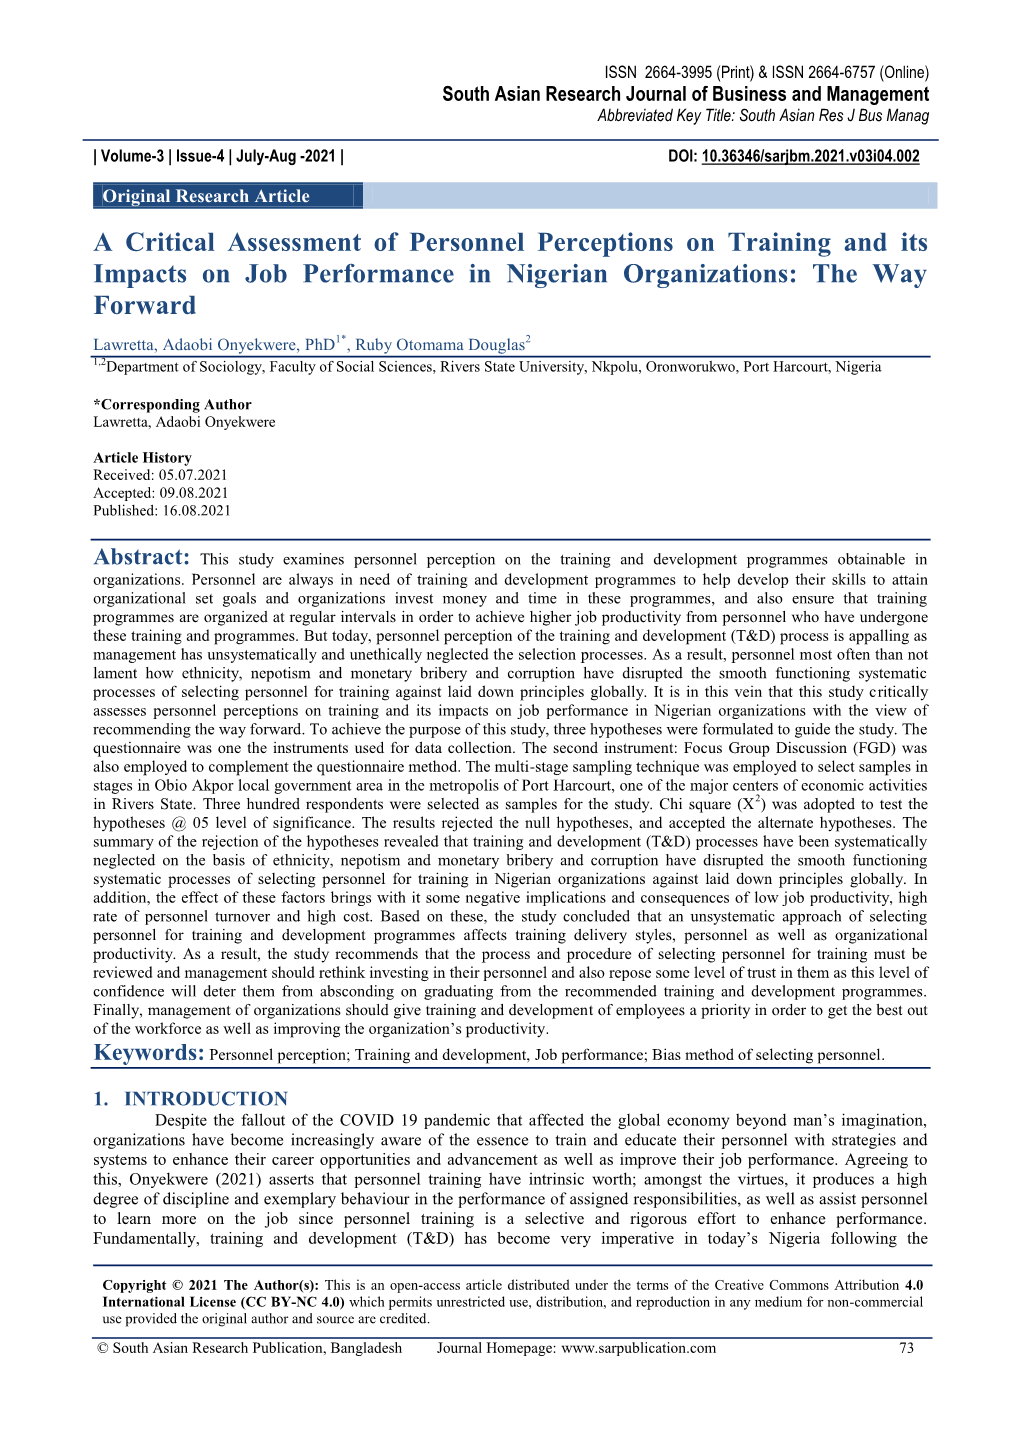 A Critical Assessment of Personnel Perceptions on Training and Its Impacts on Job Performance in Nigerian Organizations: the Way Forward